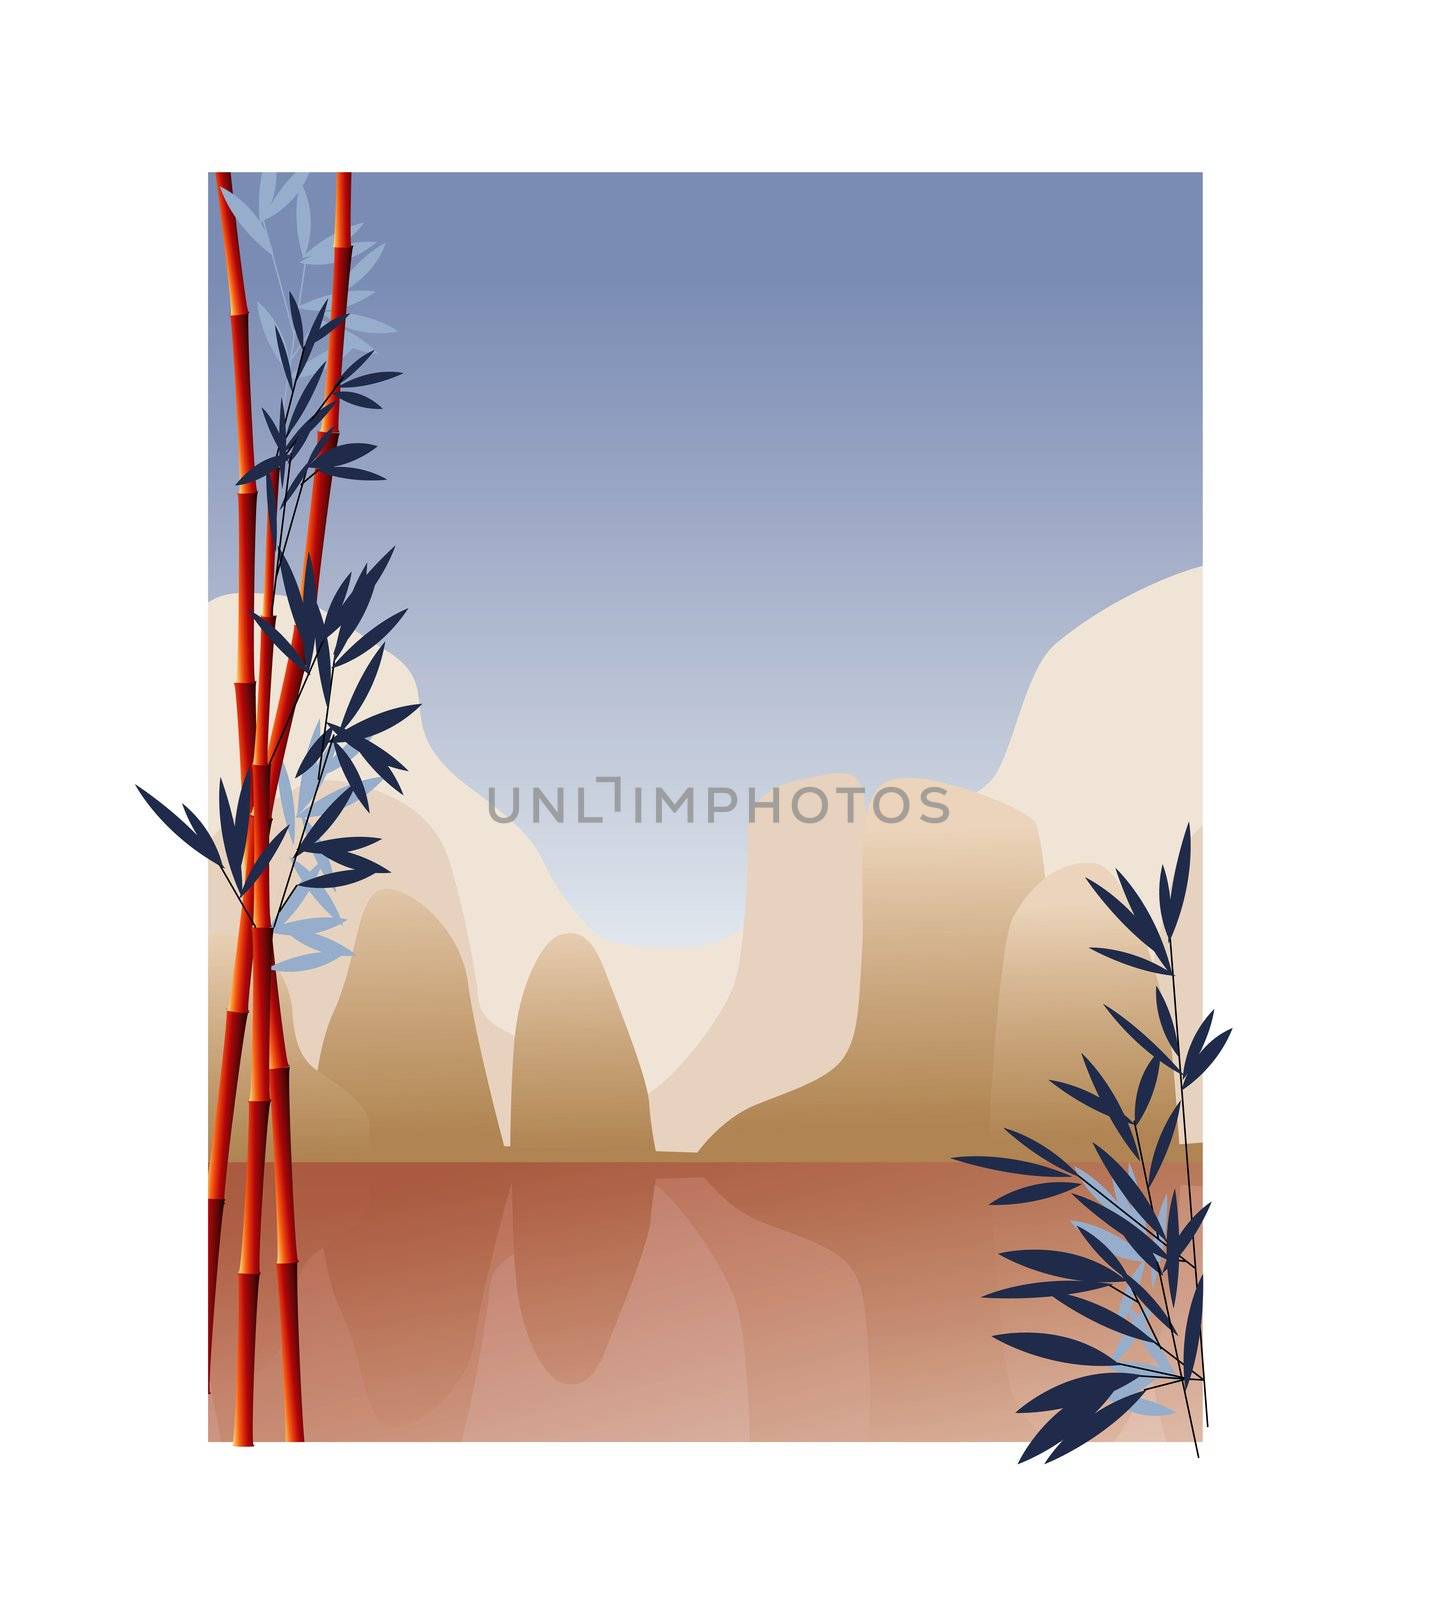 Illustration of mountains reflected in the water and framed by bamboo